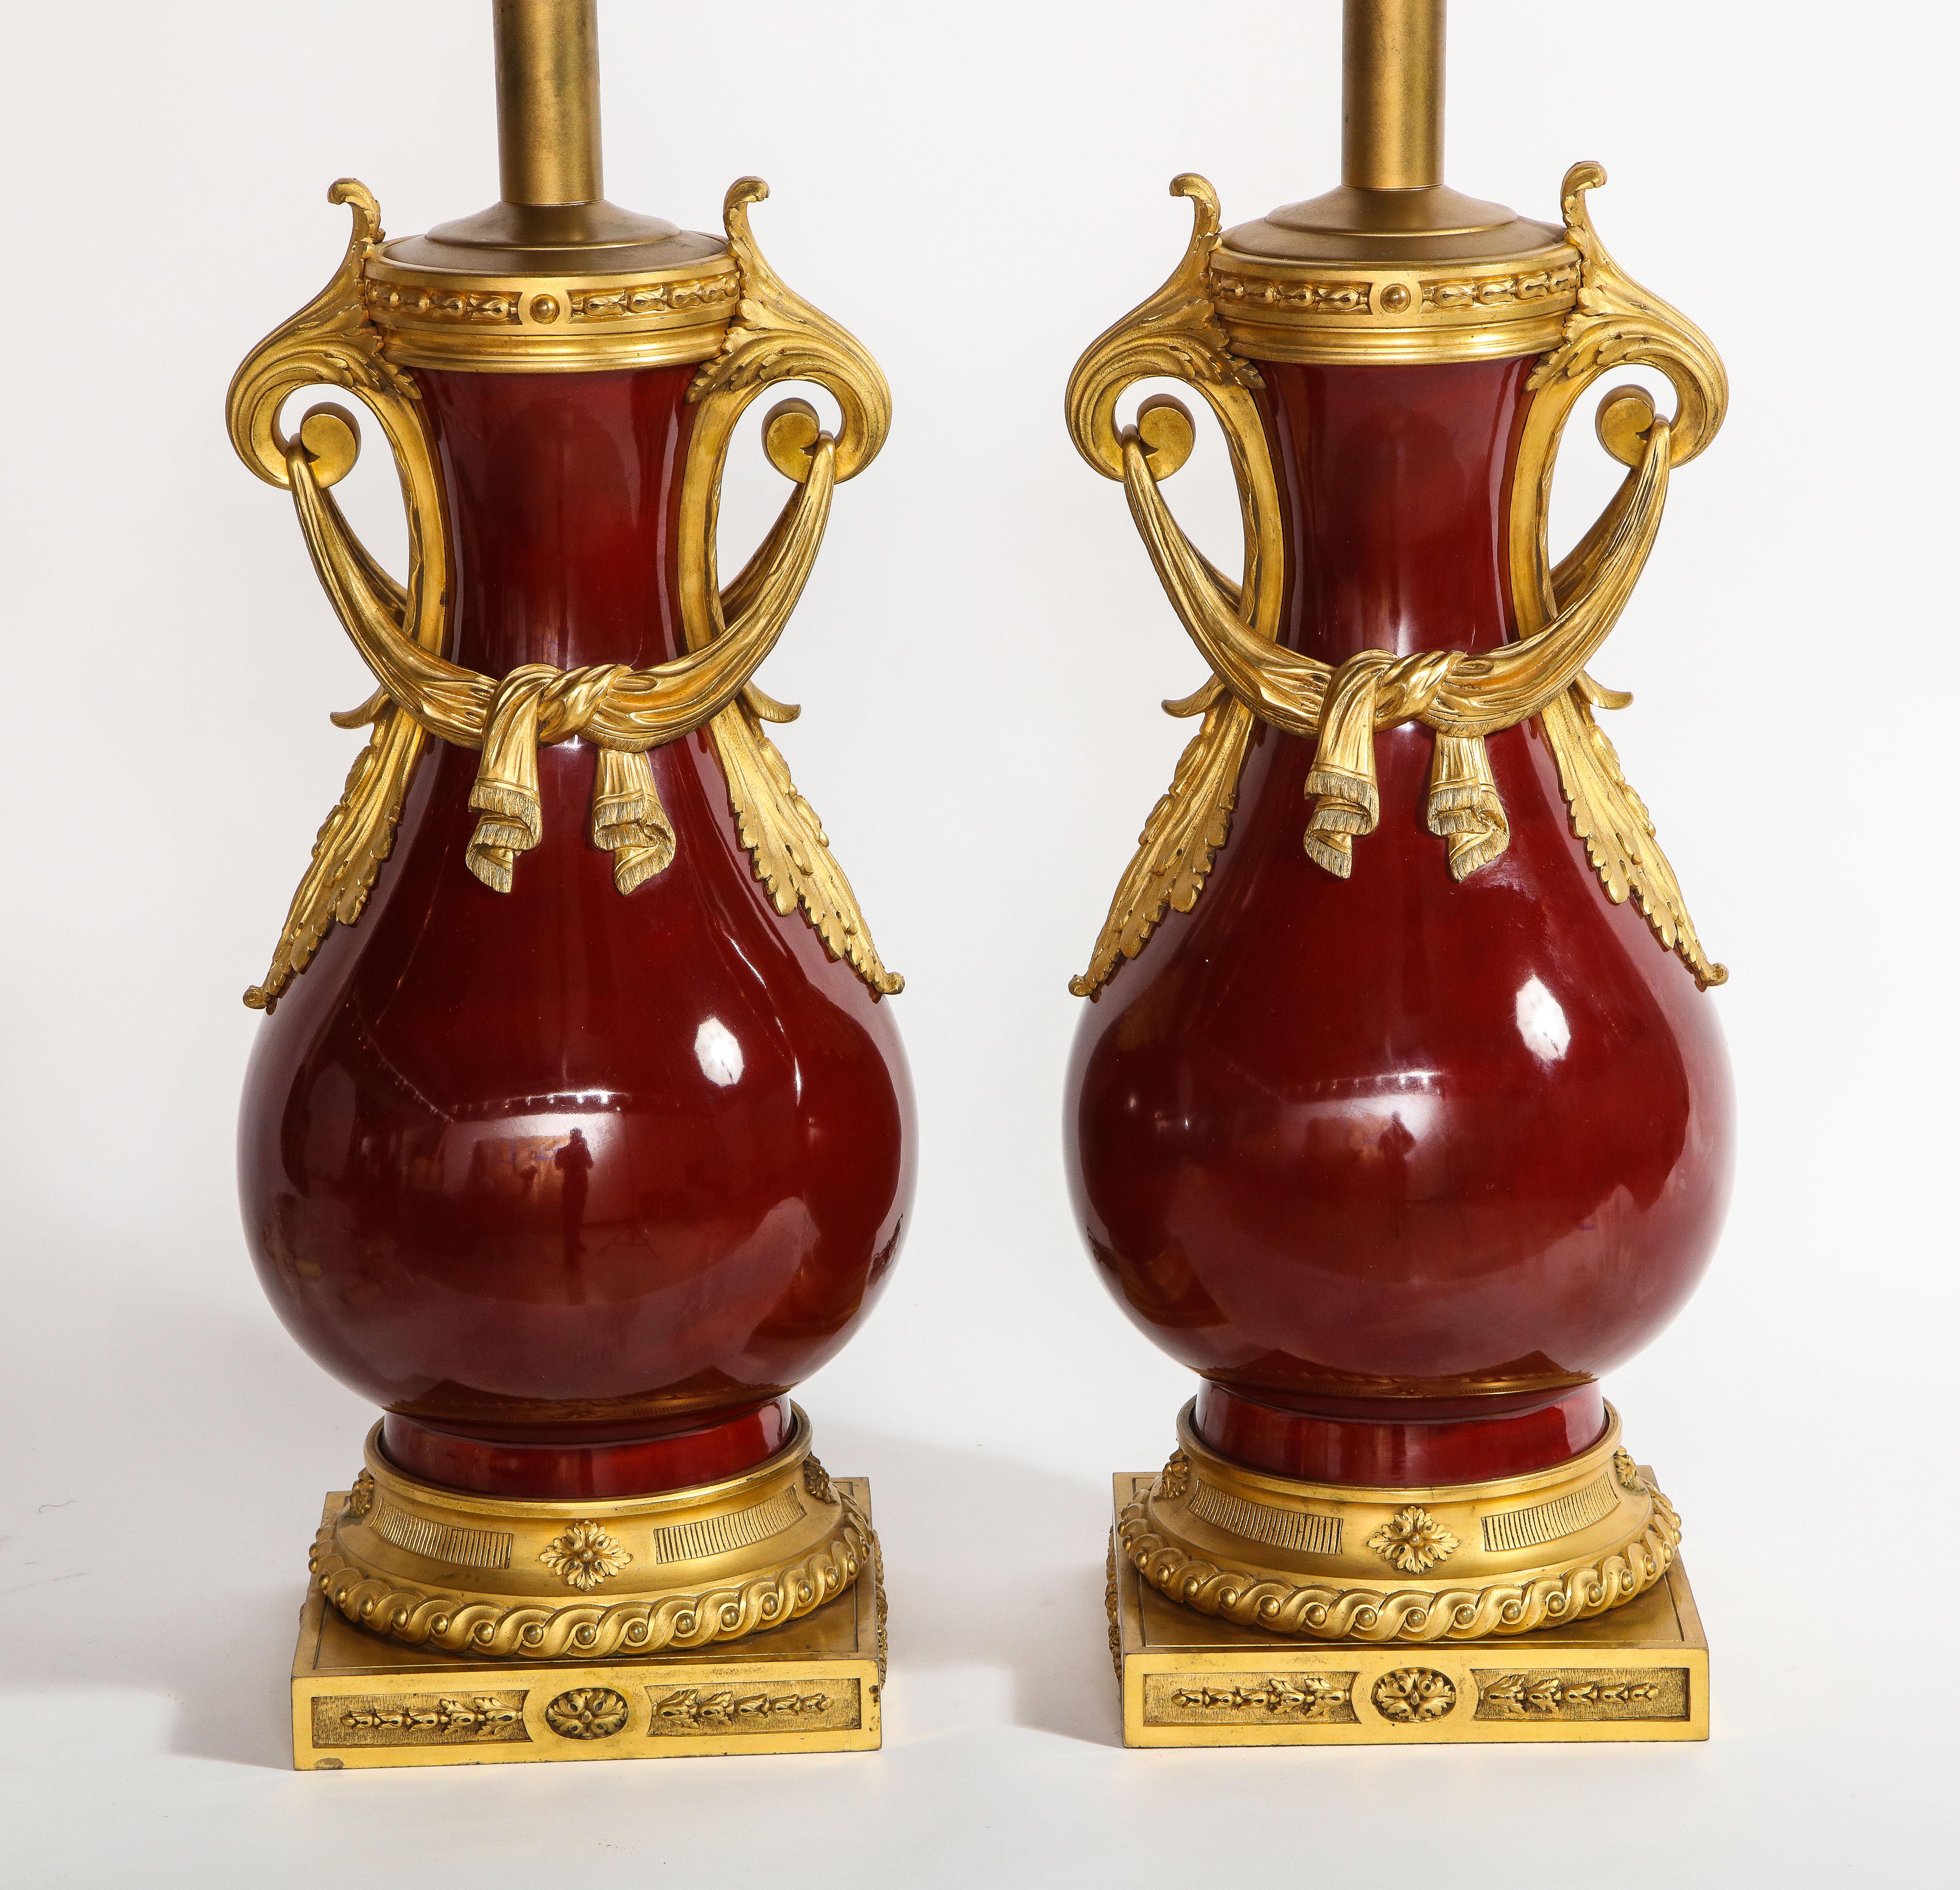 A very fine pair of antique French Louis XVI style dore bronze and Chinese sang de boeuf porcelain vases, later mounted as lamps, attributed to Alfred Beurdeley. Each baluster form mounted with twin gilt leafy cast handles, suspending gilt drapery